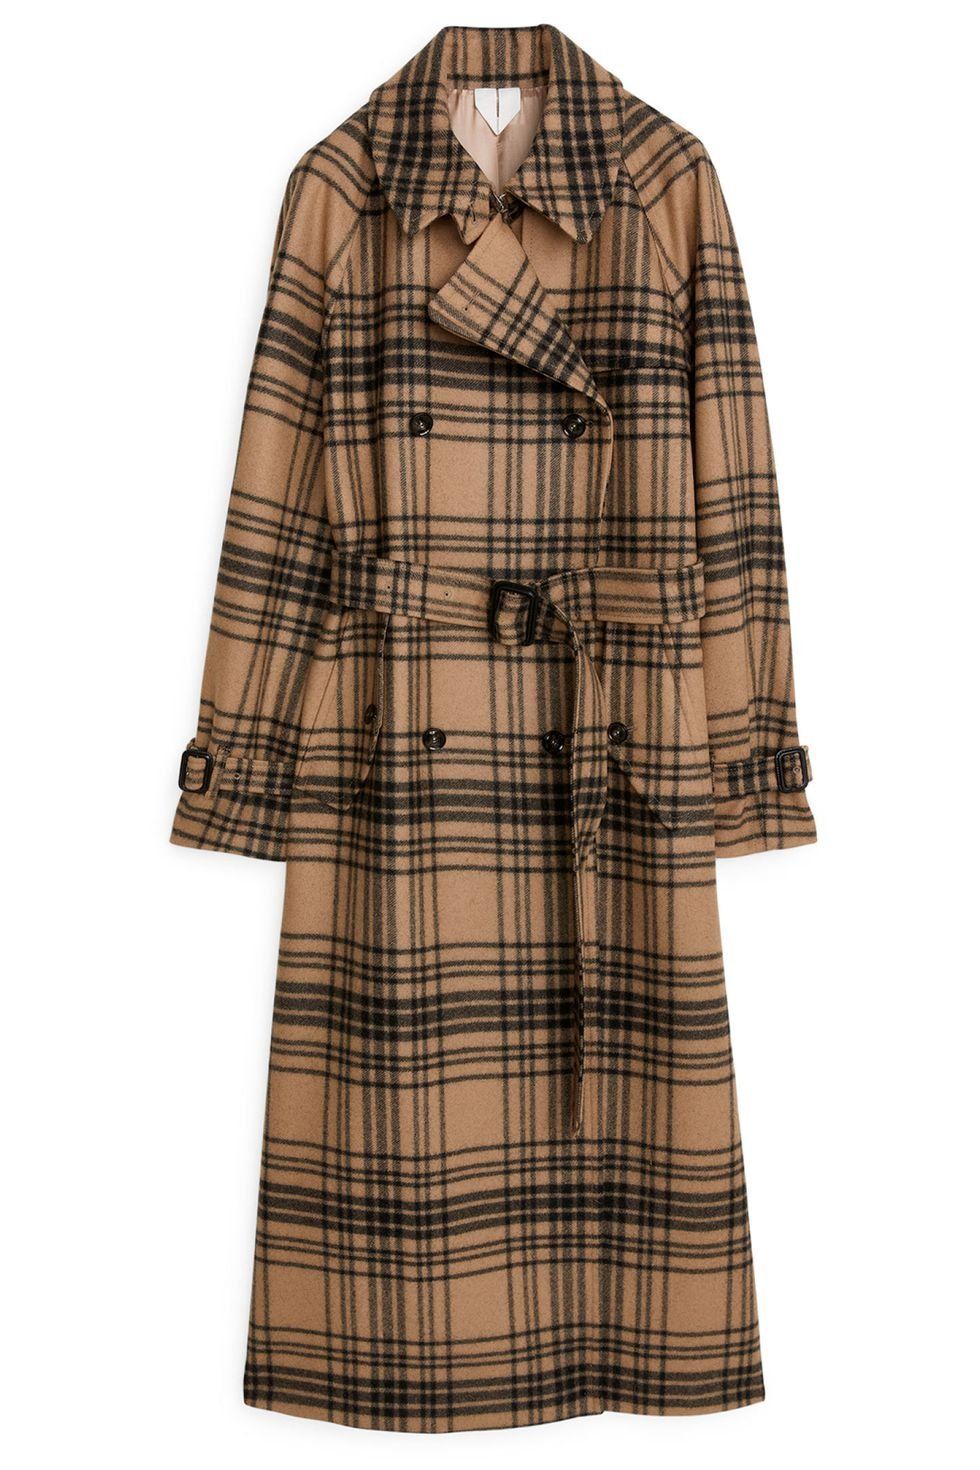 Clothing, Plaid, Tartan, Pattern, Outerwear, Coat, Sleeve, Design, Trench coat, Overcoat, 